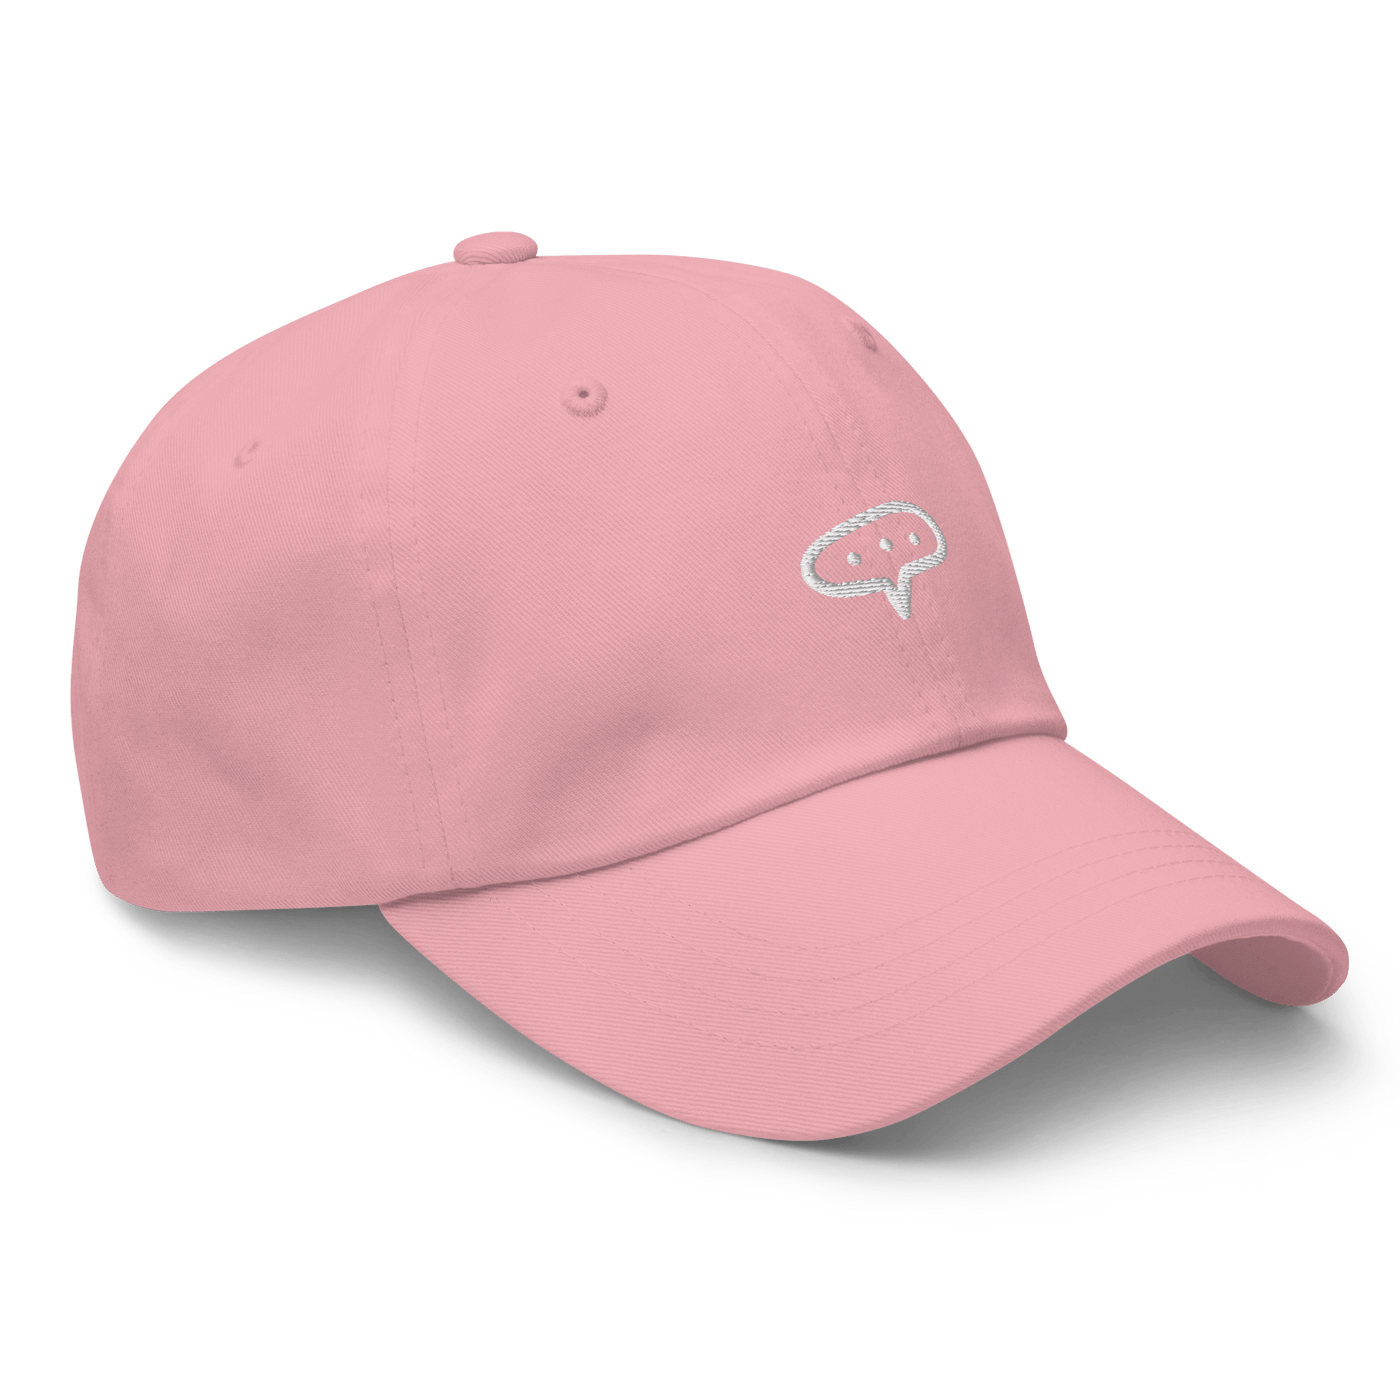 Thinking Dad hat - Pink - - Just Another Cap Store